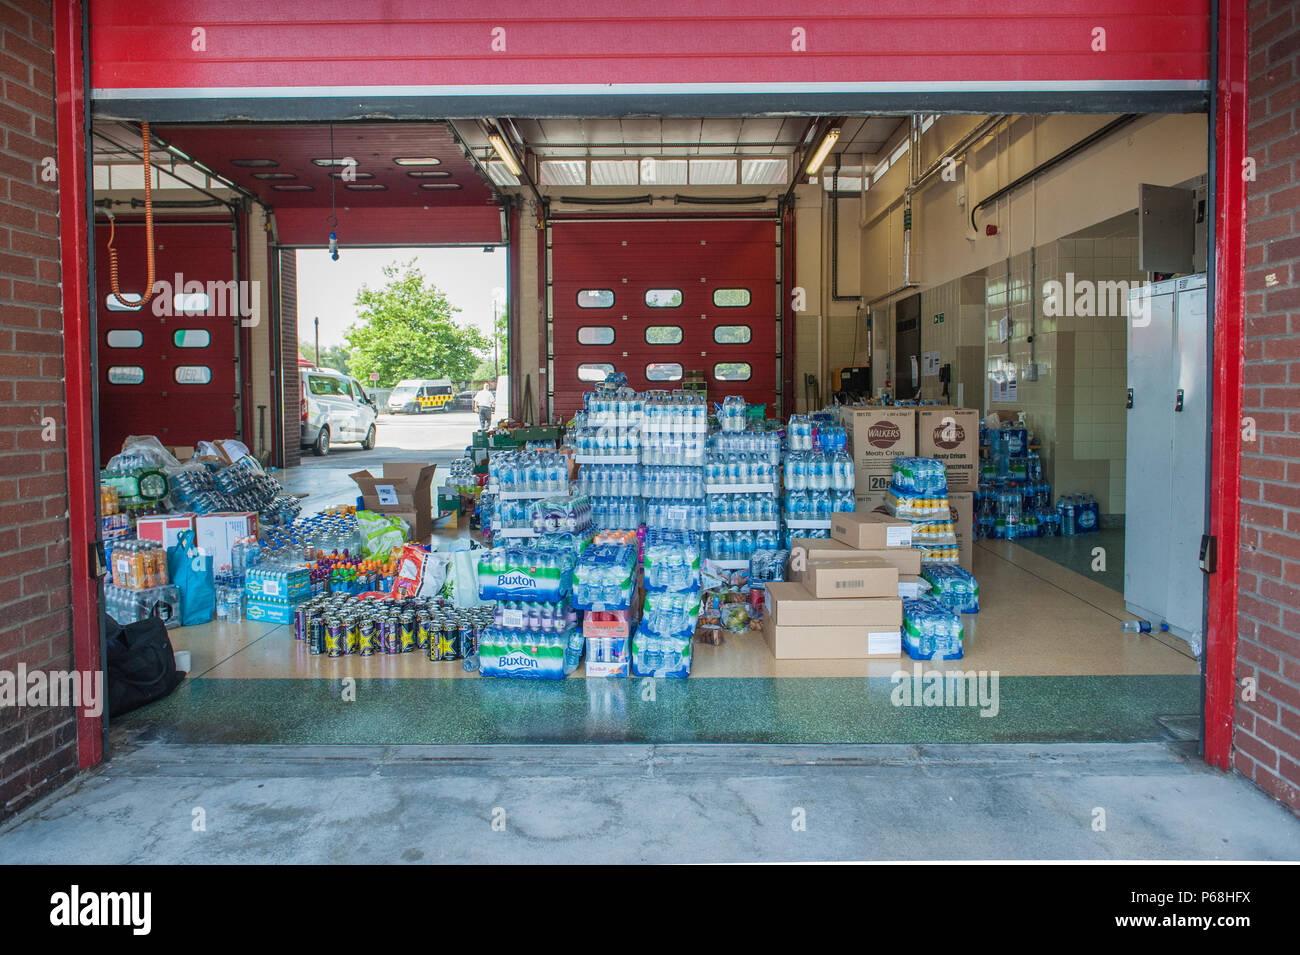 Stalybridge Fire Station, Greater Manchester, UK. 29th June, 2018. Supplies including water and food given by the public and local businesses for the needs of firefighters tackling the huge blaze on Saddleworth Moor, at Stalybridge Fire Station, Greater Manchester on Friday 29th June 2018. Credit: Matthew Wilkinson/Alamy Live News Stock Photo